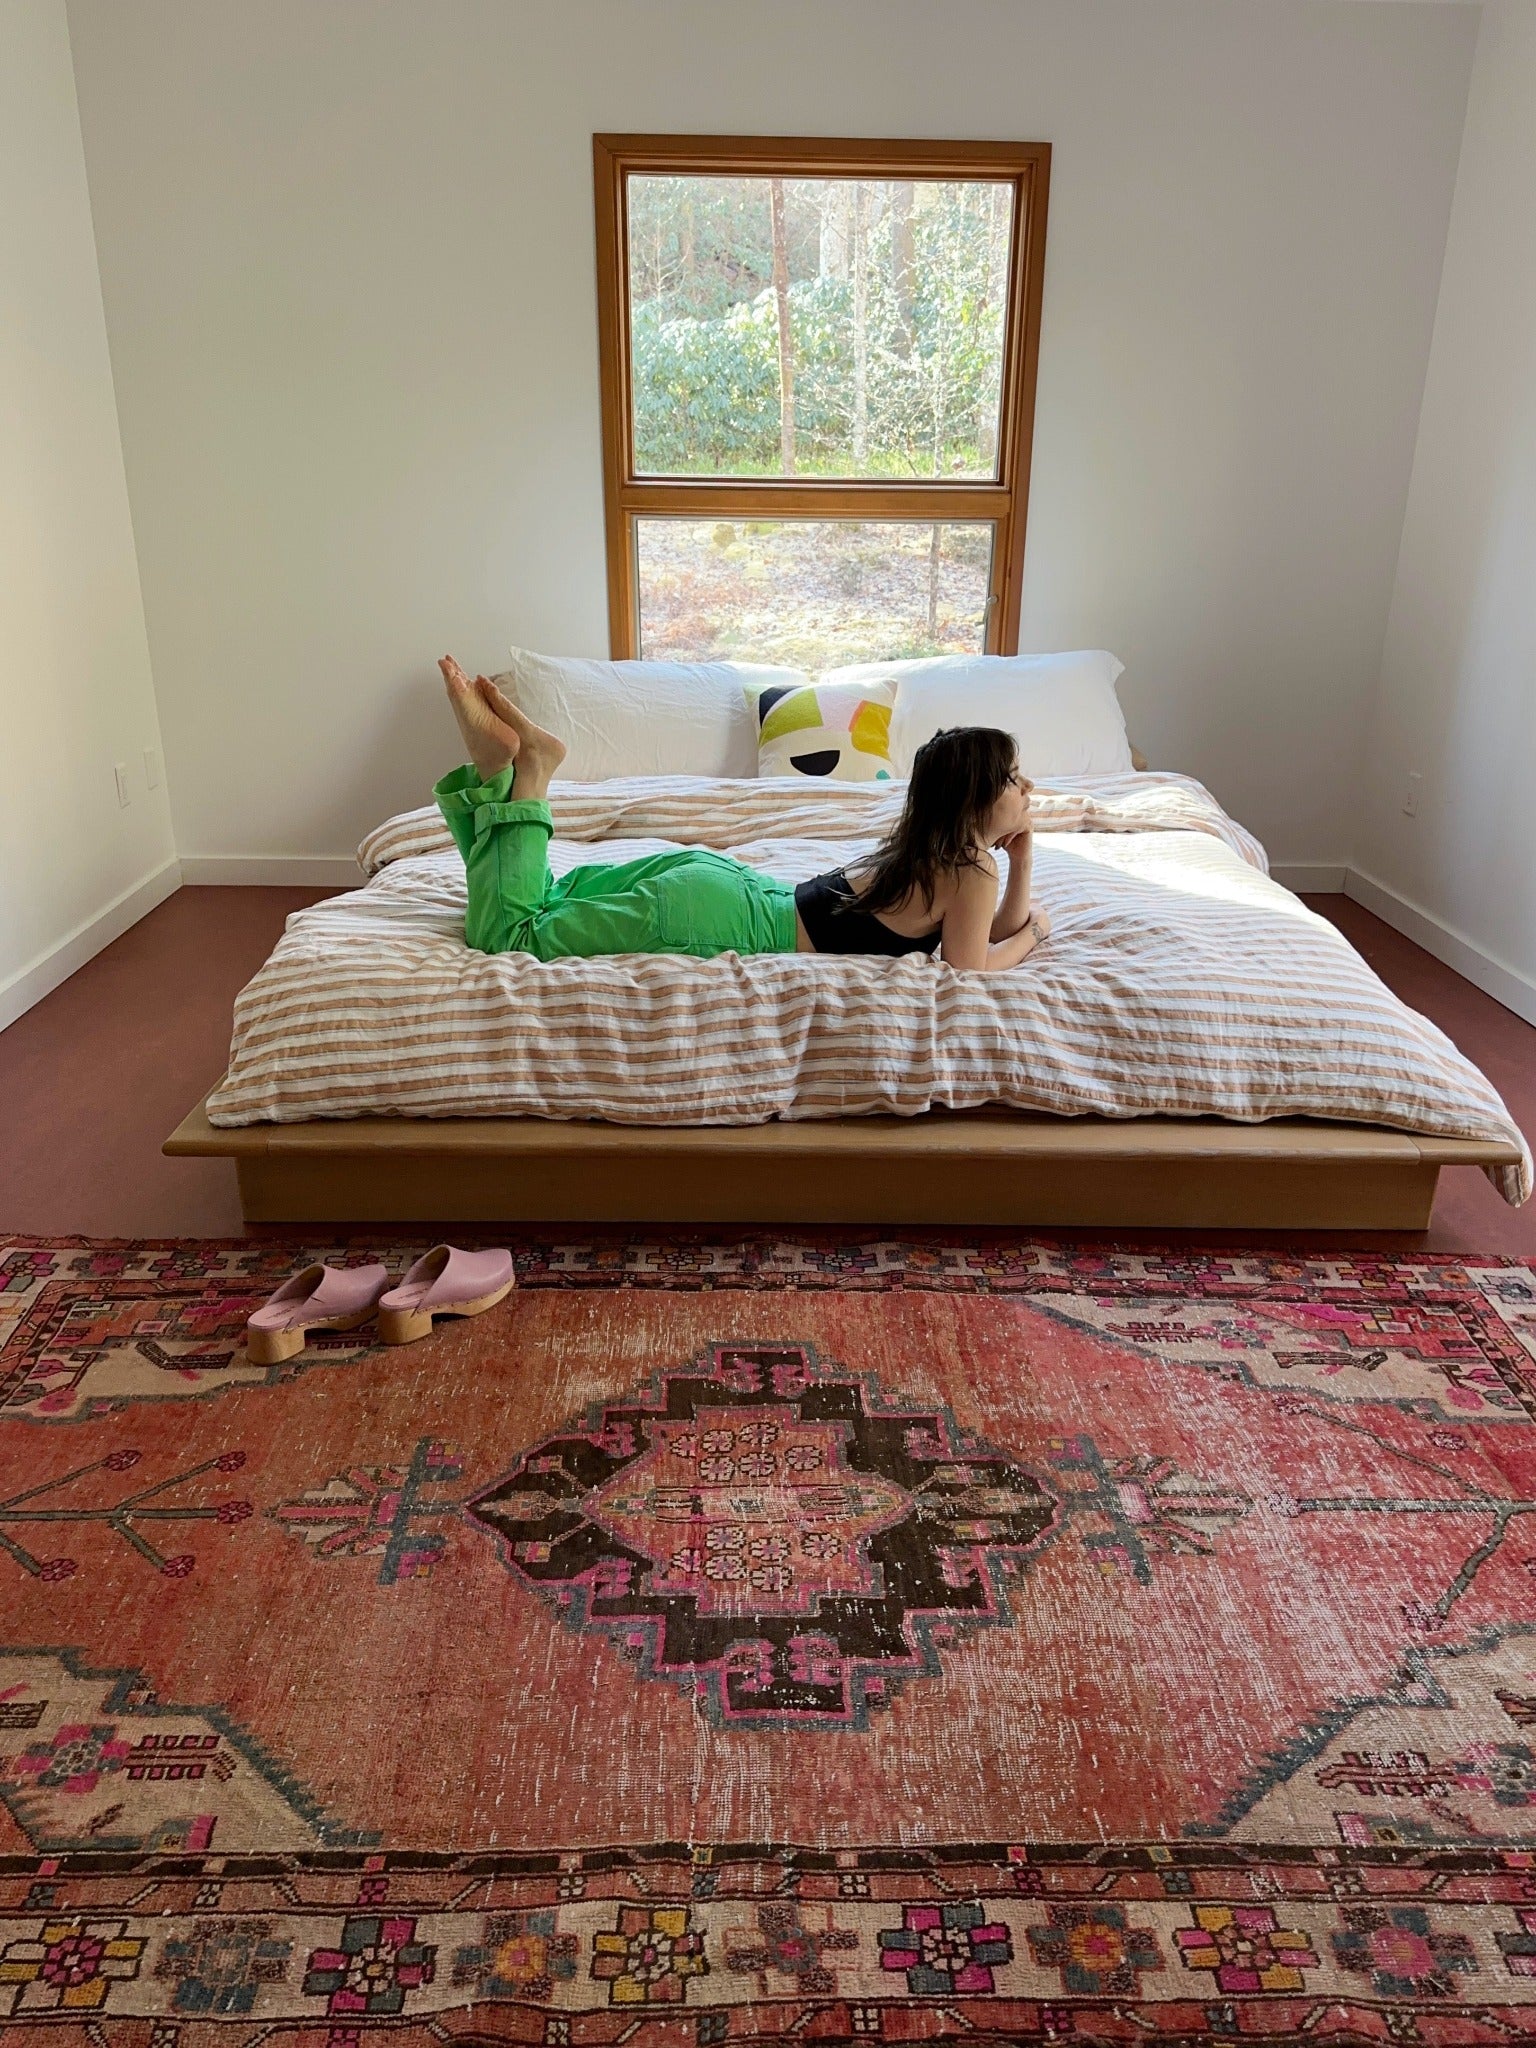 See Solanum Persian Rug Styled at the Foot of a Bed